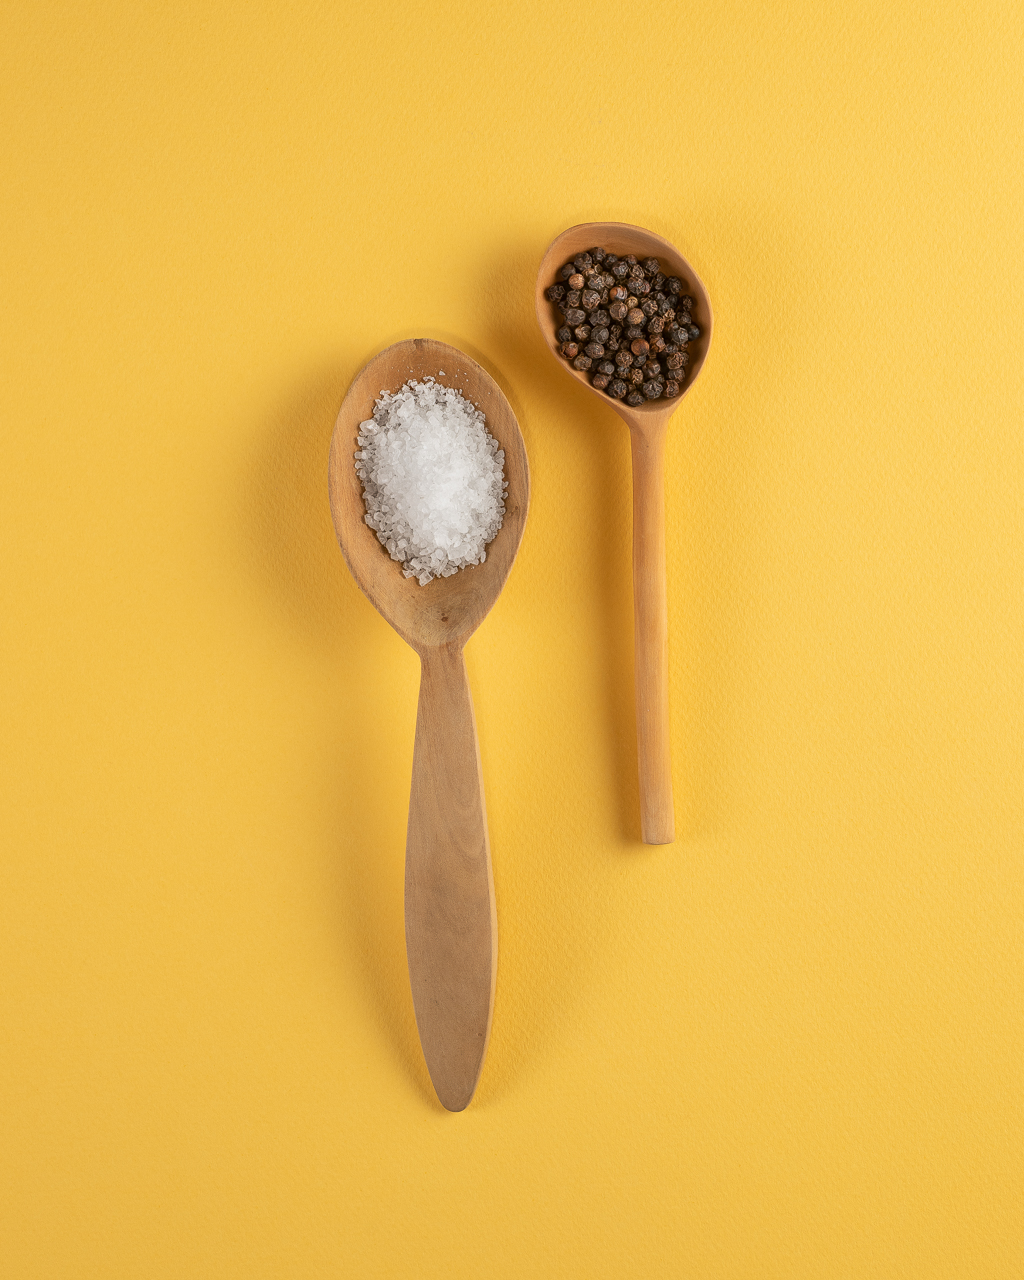 Salt and pepper on wooden spoons on yellow by Jose Barrios